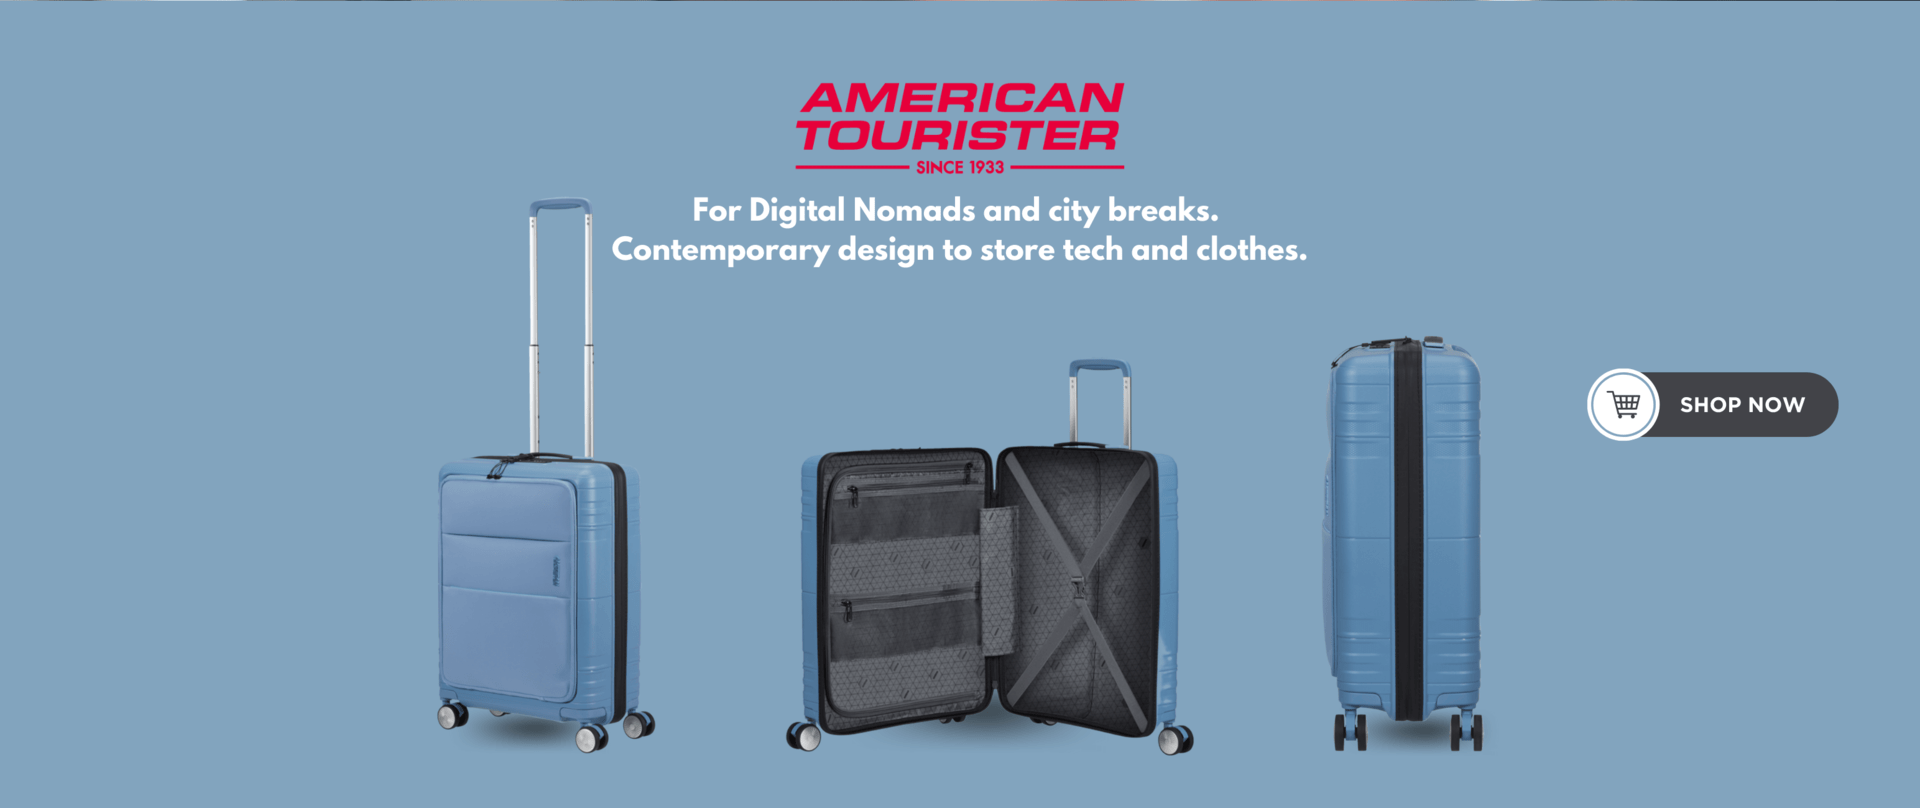 American Tourister Products